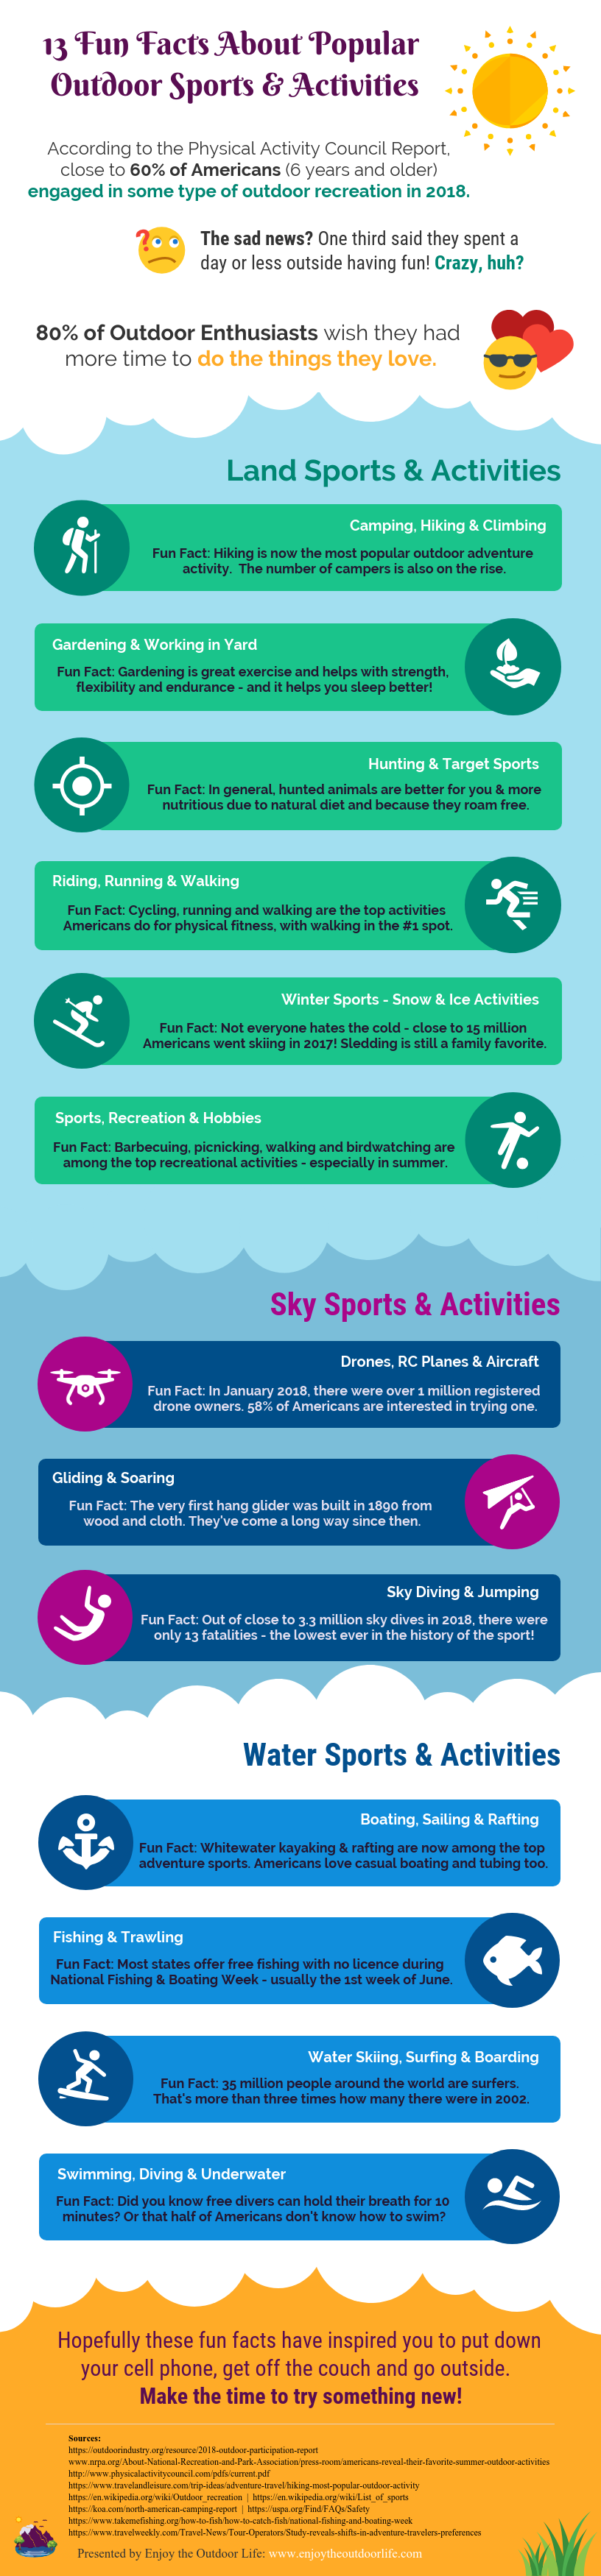 13 fun facts about popular outdoor sports activities infographic - text version below